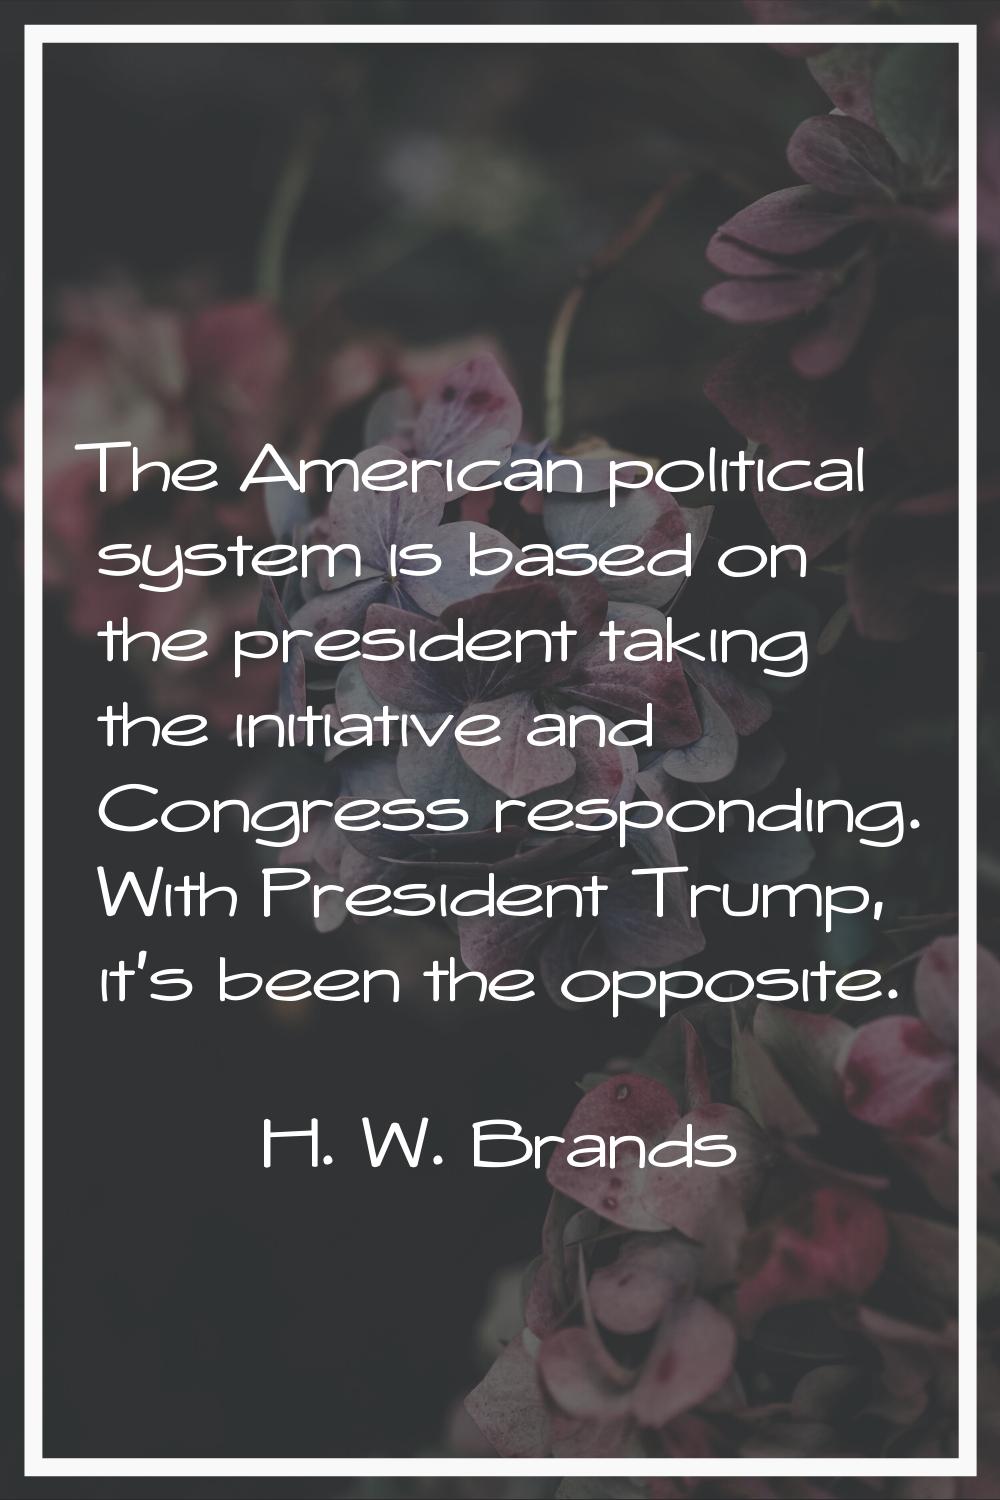 The American political system is based on the president taking the initiative and Congress respondi